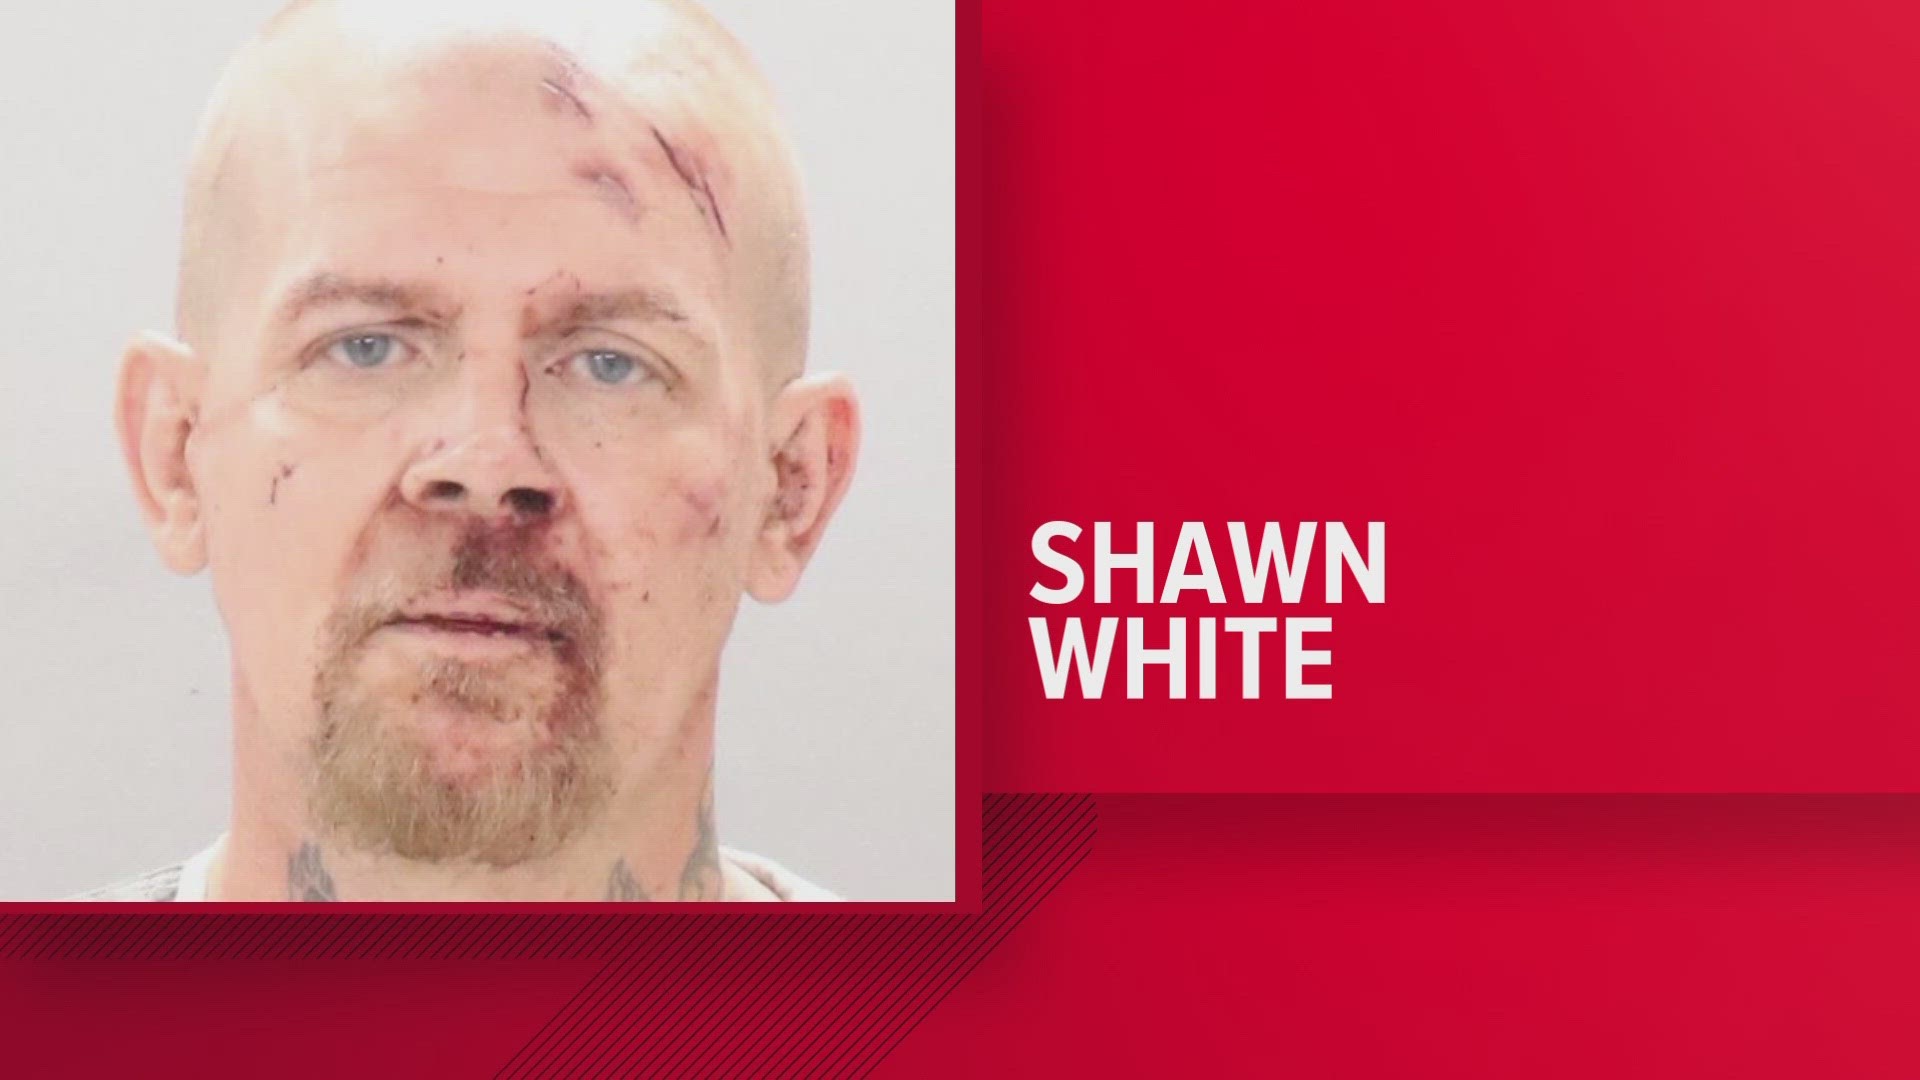 The Department of Justice said Shawn White could face up to 25 years behind bars. The FBI, Knoxville police and THP are still investigating.